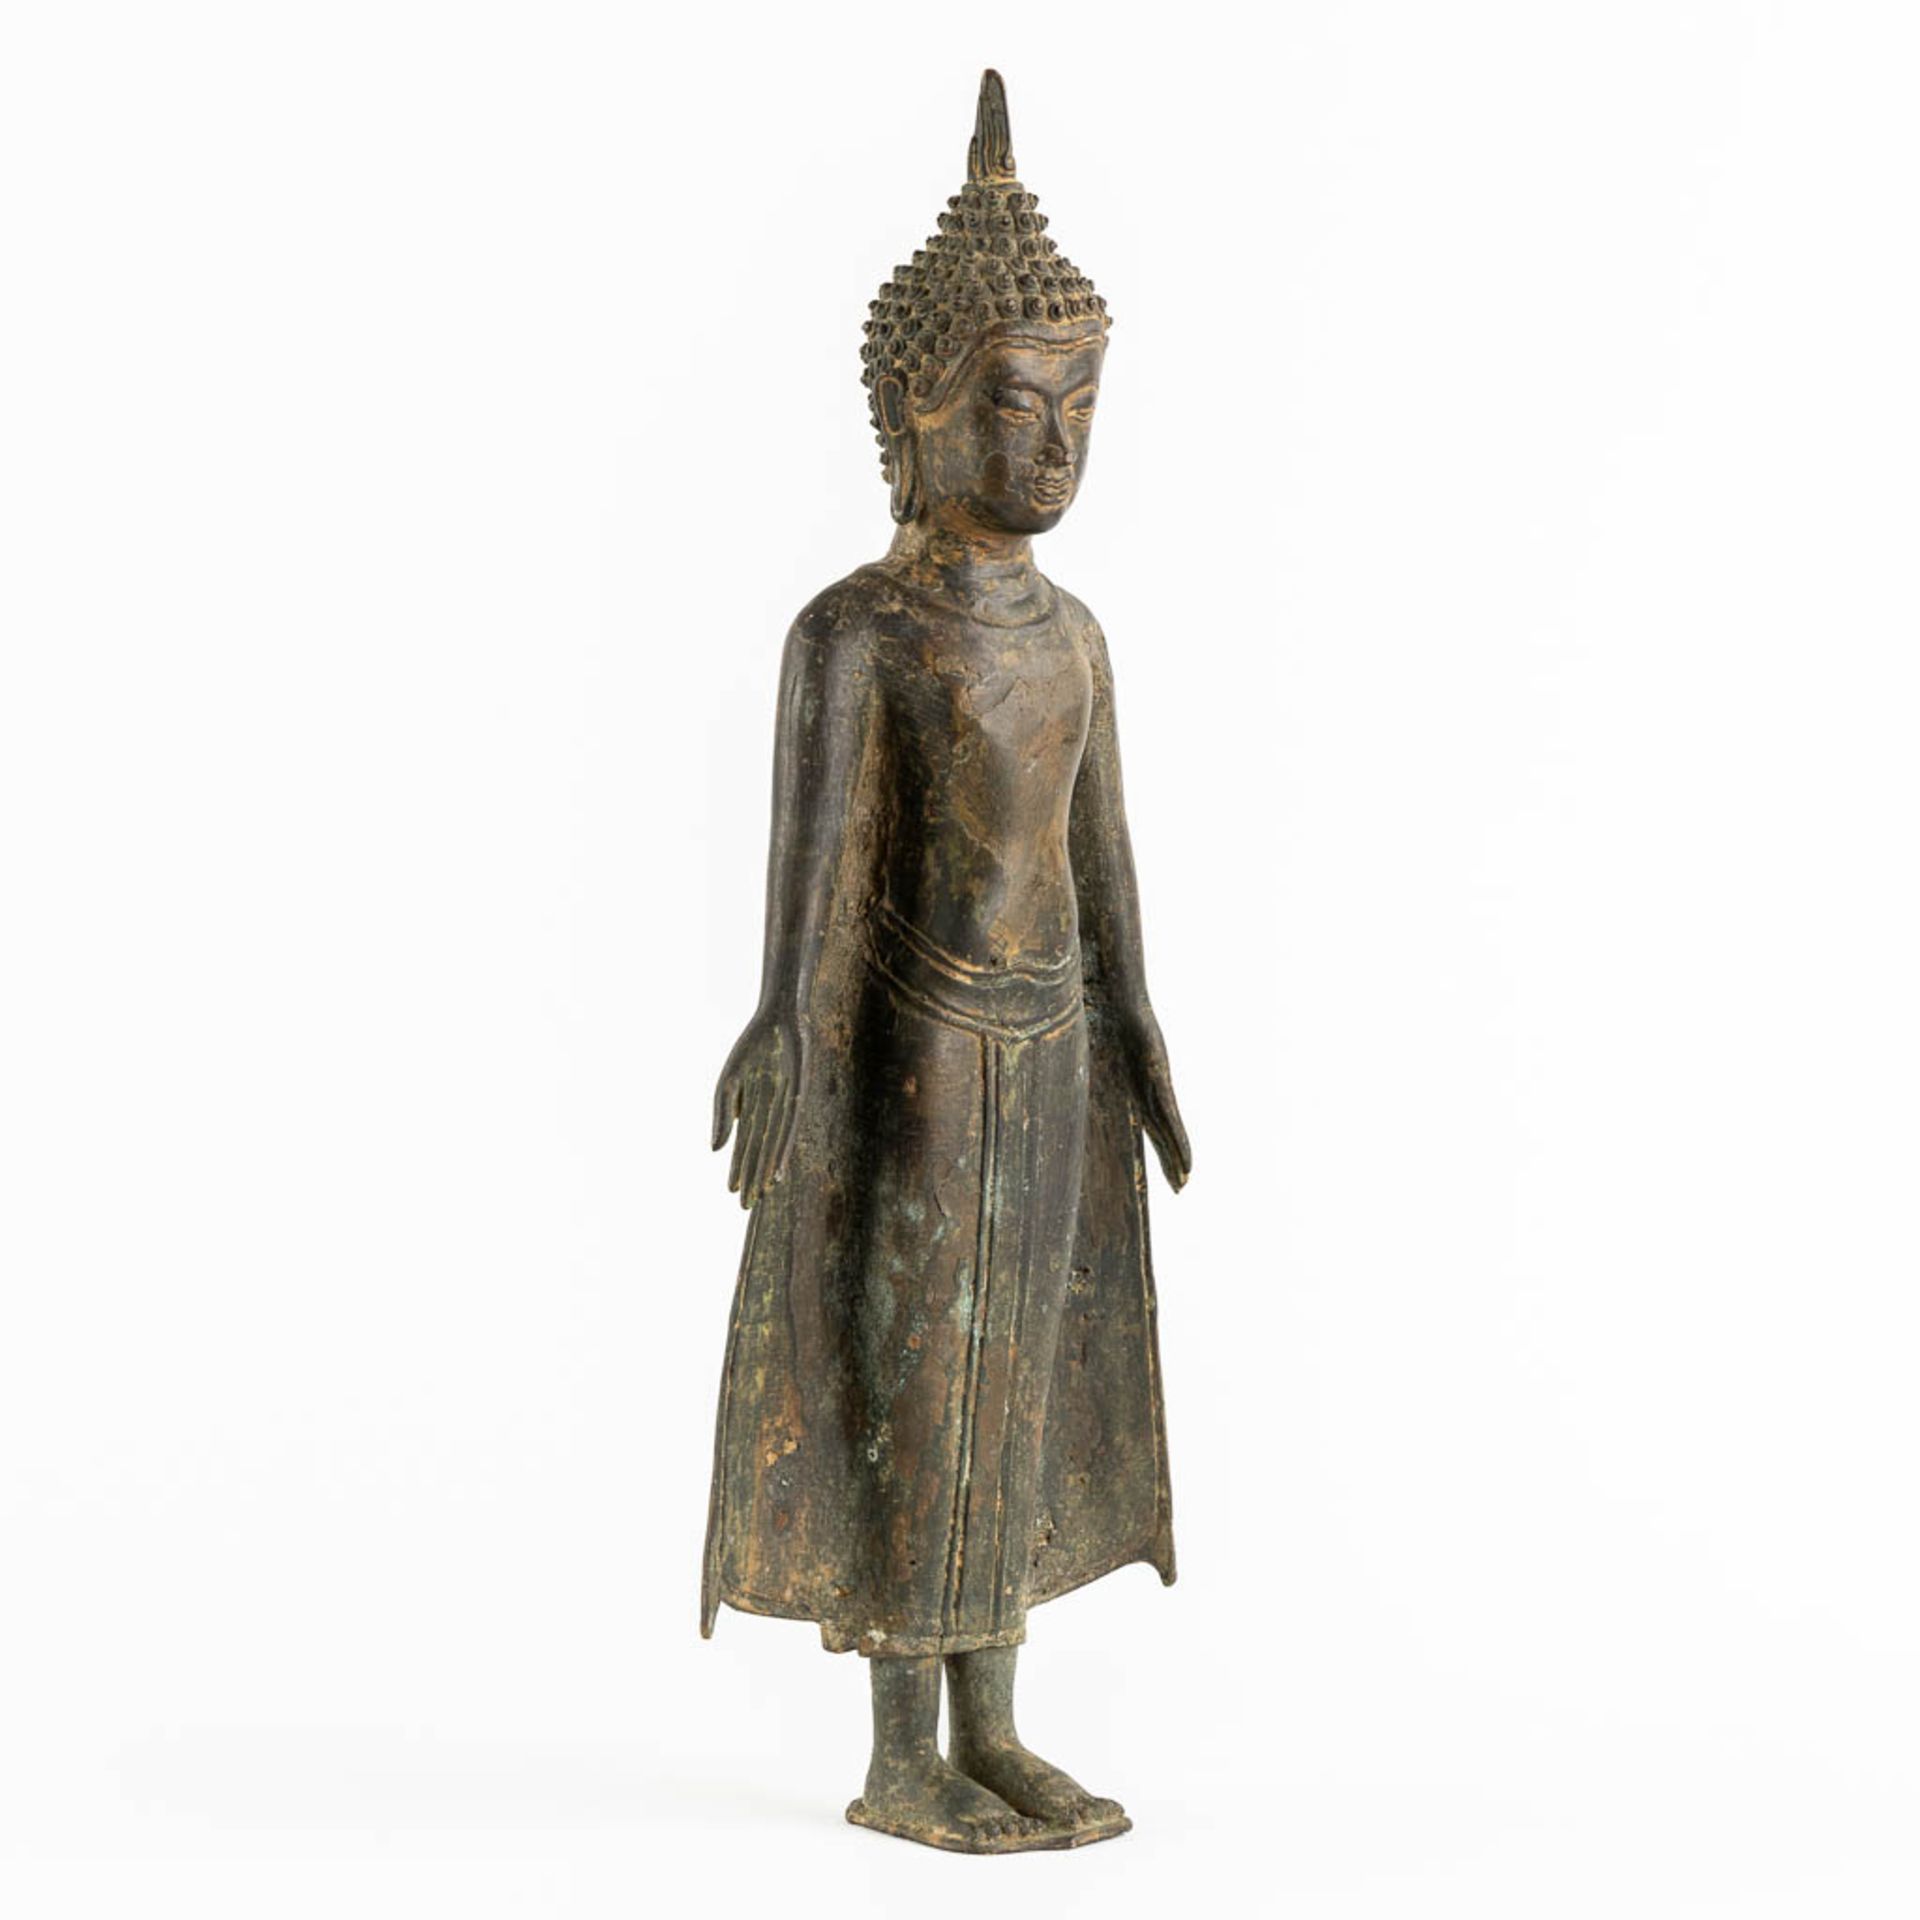 A Thai figurine of a standing Buddha, Patinated bronze. (W:16 x H:44 cm) - Image 3 of 10